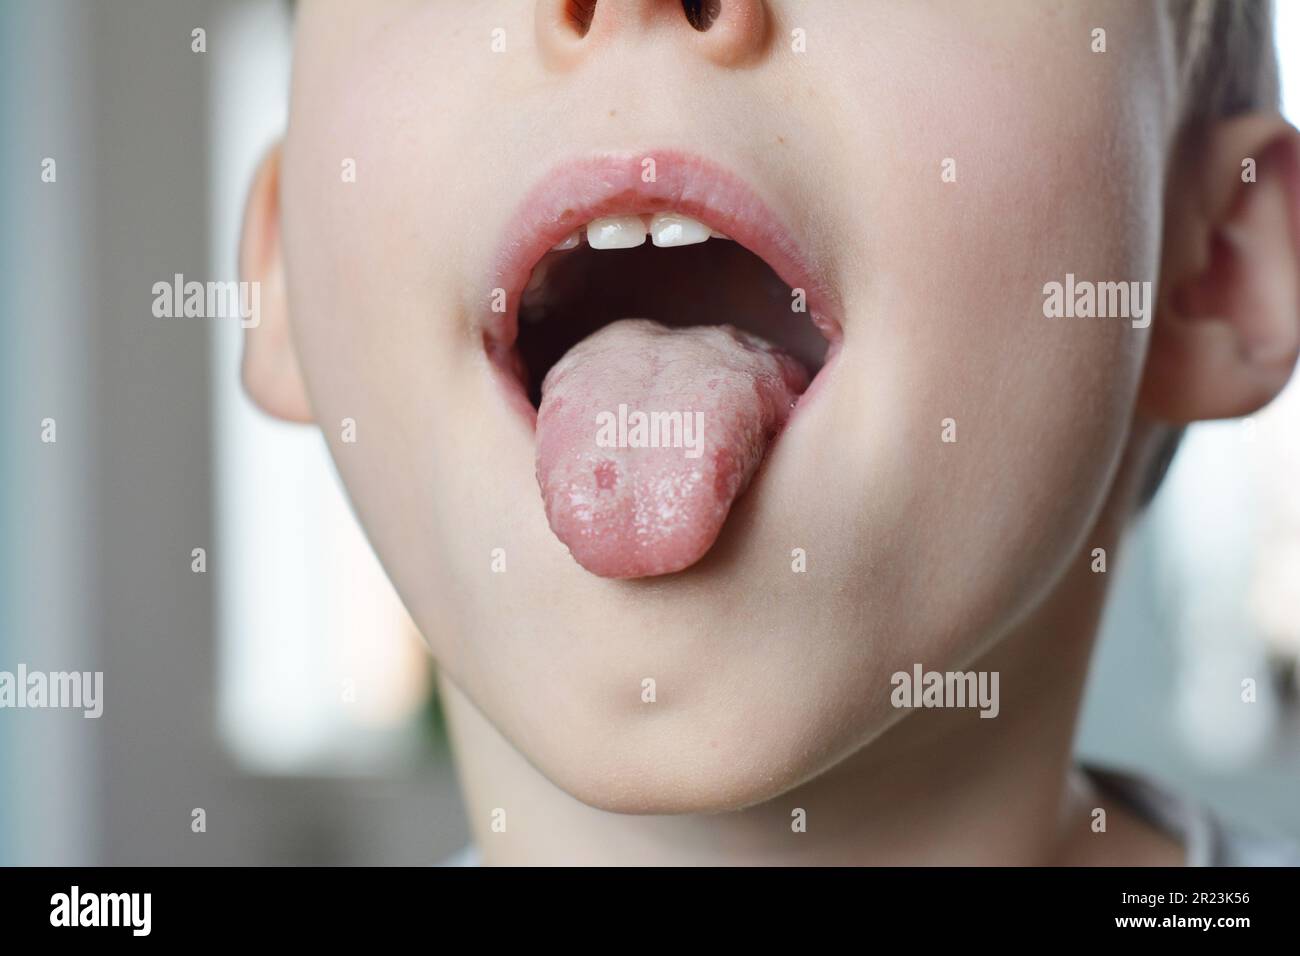 White spots on the tongue. Oral thrush is a fungal infection that affects the soft tissue inside the mouth. It is quite common in young children. Stock Photo